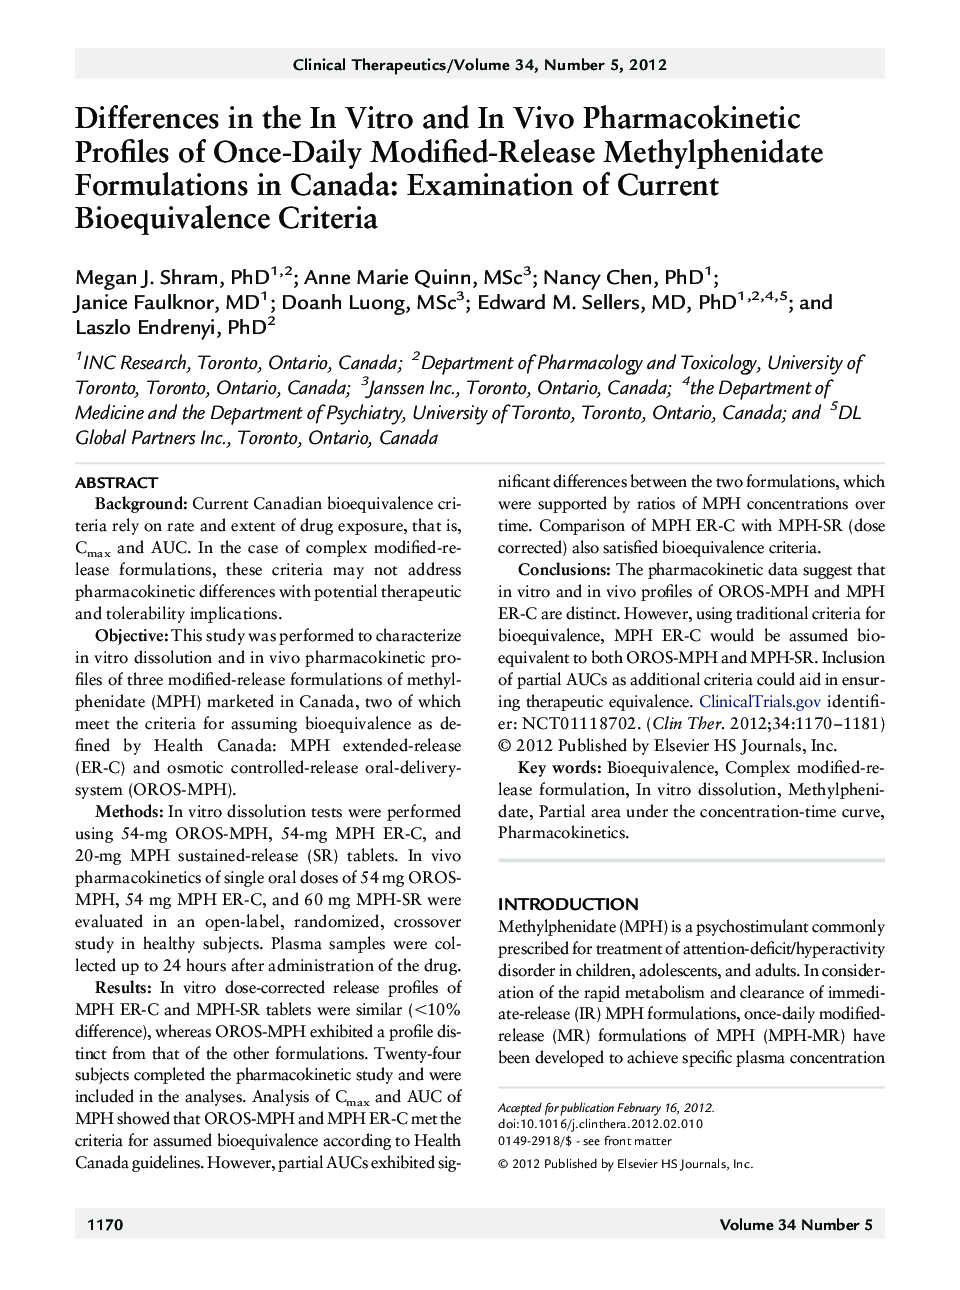 Differences in the In Vitro and In Vivo Pharmacokinetic Profiles of Once-Daily Modified-Release Methylphenidate Formulations in Canada: Examination of Current Bioequivalence Criteria